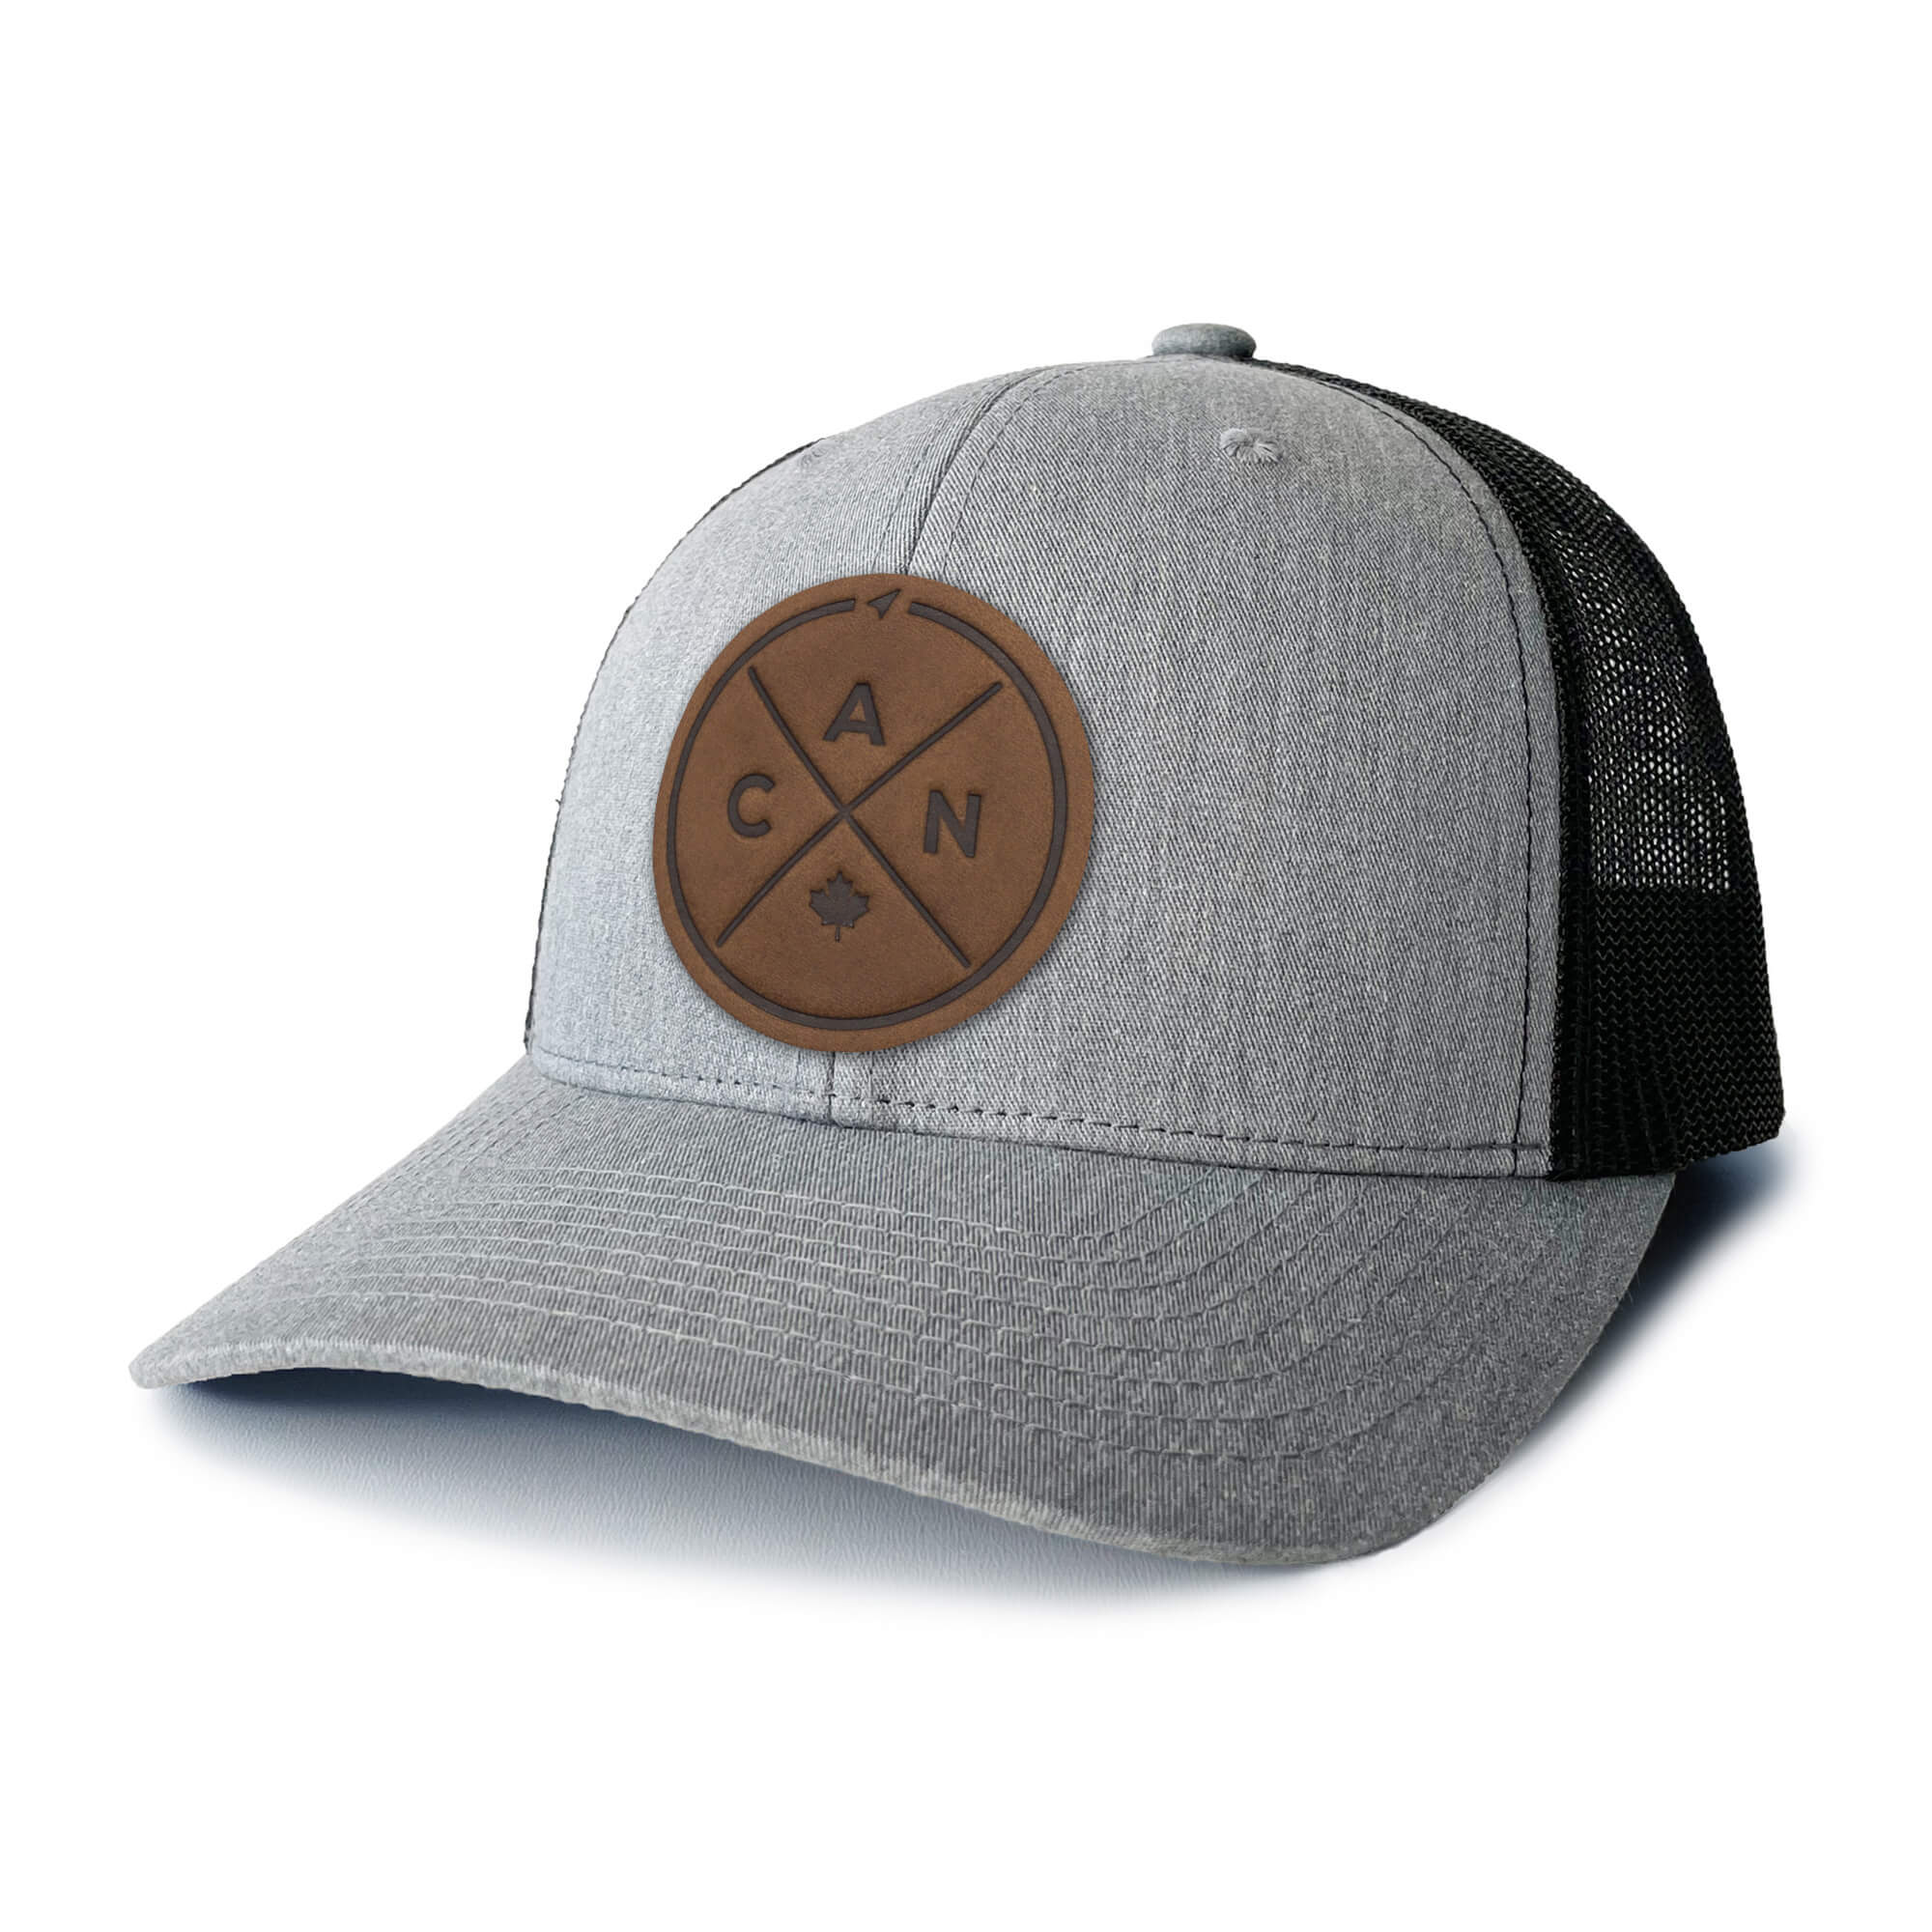 Heather grey and white trucker hat with full-grain leather patch of Canada Compass | BLACK-002-011, CHARC-002-011, NAVY-002-011, HGREY-002-011, MOSS-002-011, BROWN-002-011, RED-002-011